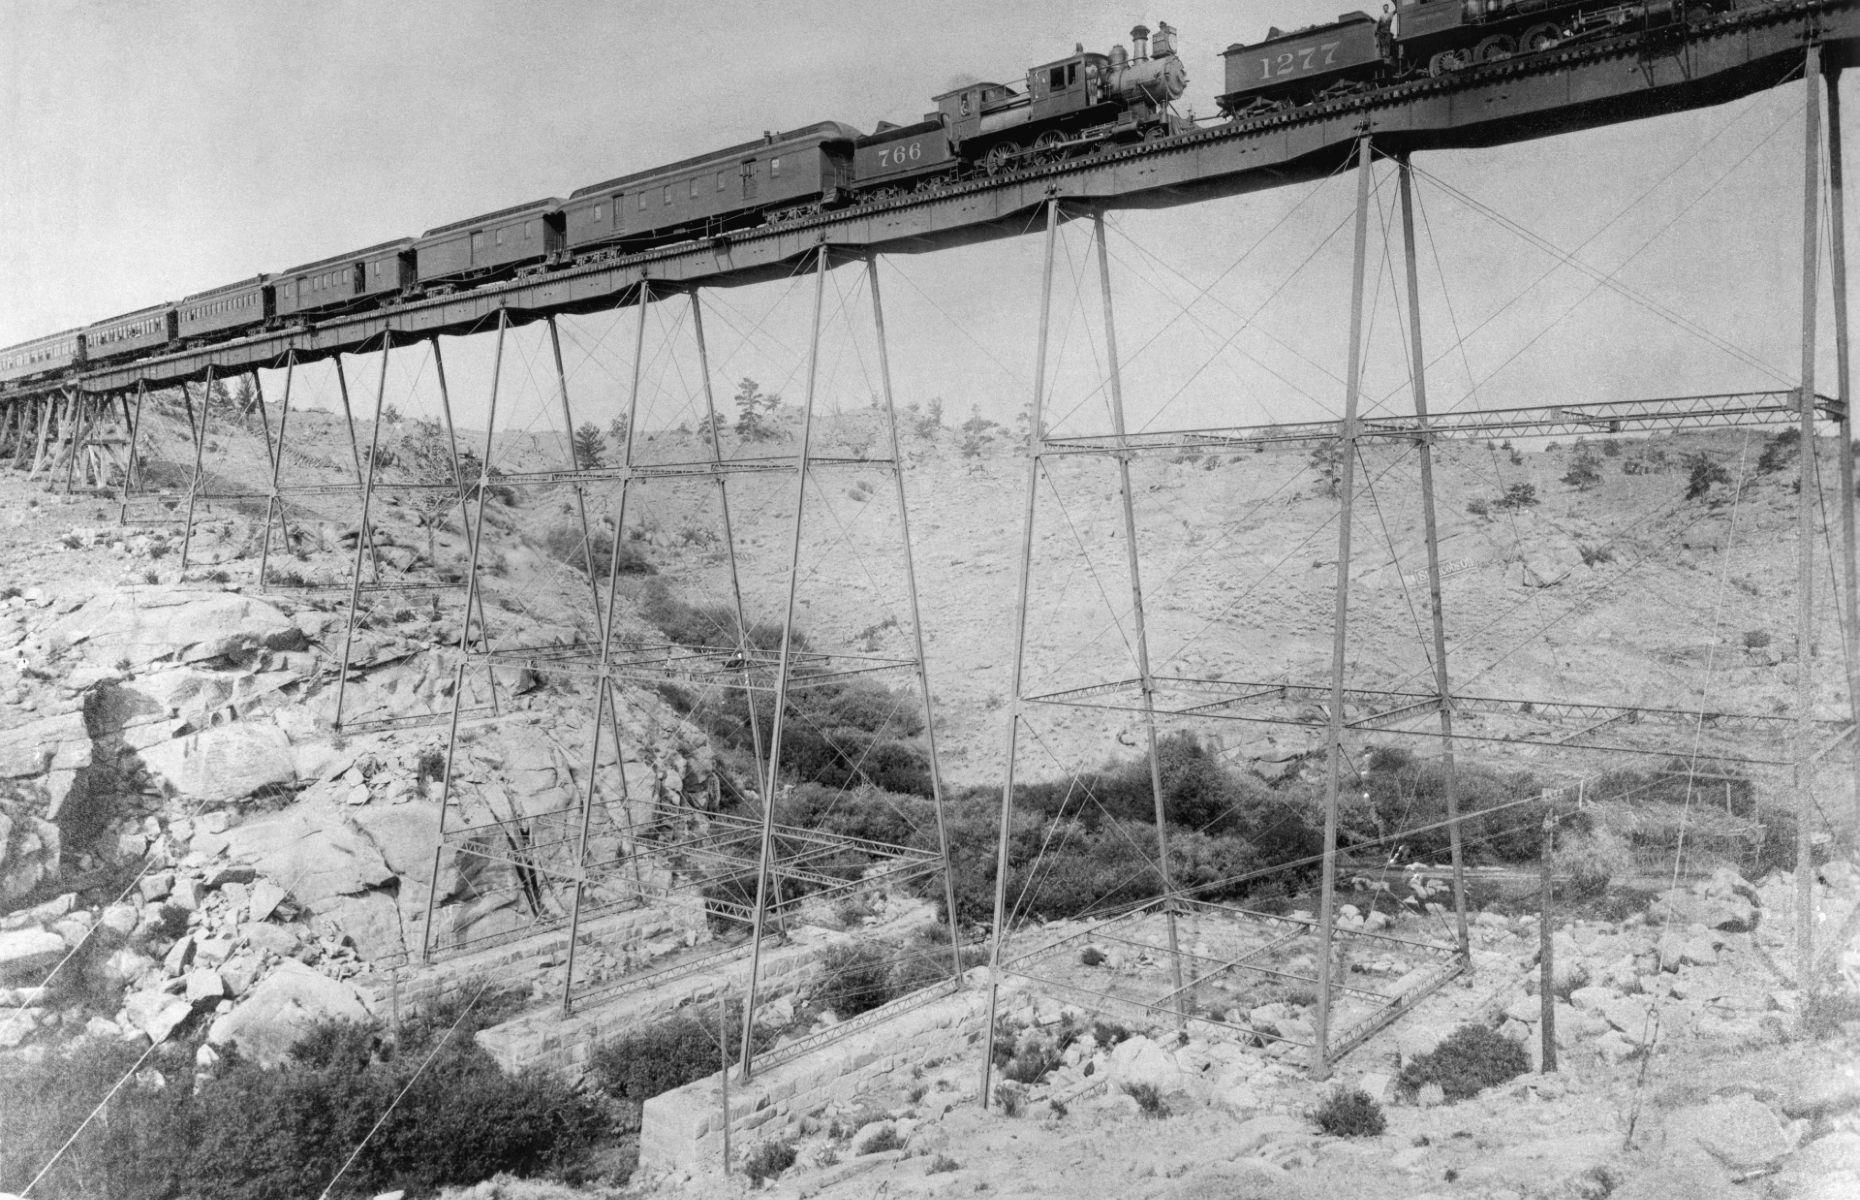 <p>When the Union Pacific Railroad reached the seemingly impassable Dale Creek, Wyoming in 1868, they initially breached the gap with a wooden trestle bridge – but it was a rickety structure. Two carpenters fell from the bridge to their deaths, and it swayed alarmingly when trains passed over it. In 1876 the original crossing was replaced by an iron bridge, pictured here in 1885. The spindly legs did a much better job of holding up the tracks, although trains still had to slow to 4 miles per hour when crossing.</p>